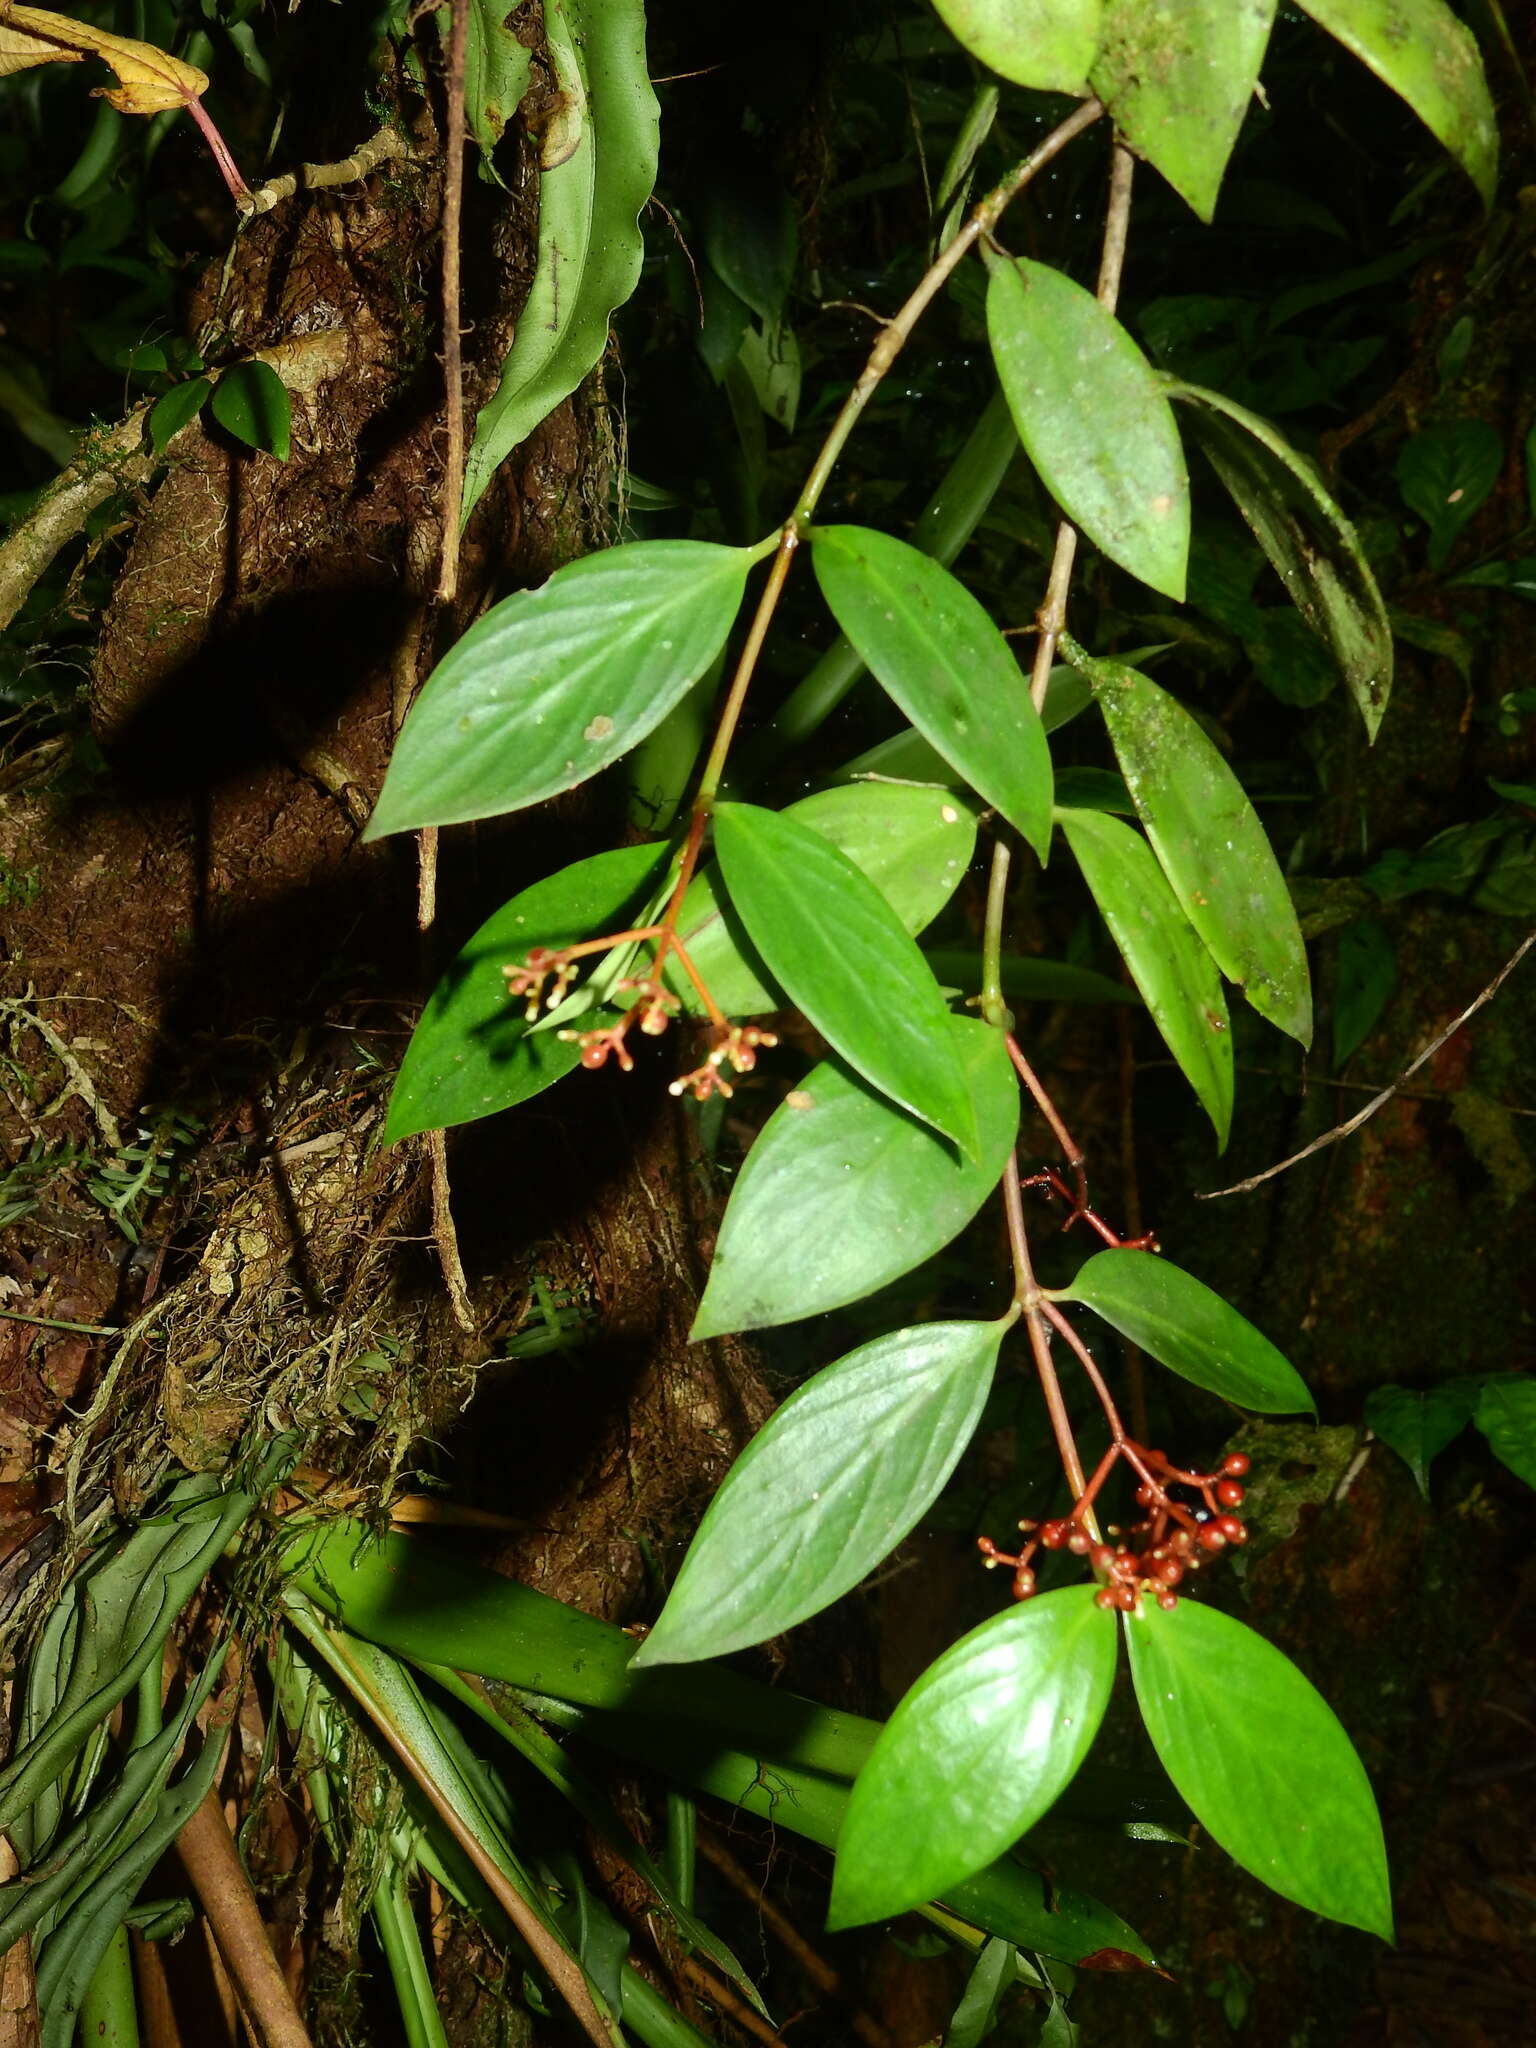 Image of Guadalupe wild coffee